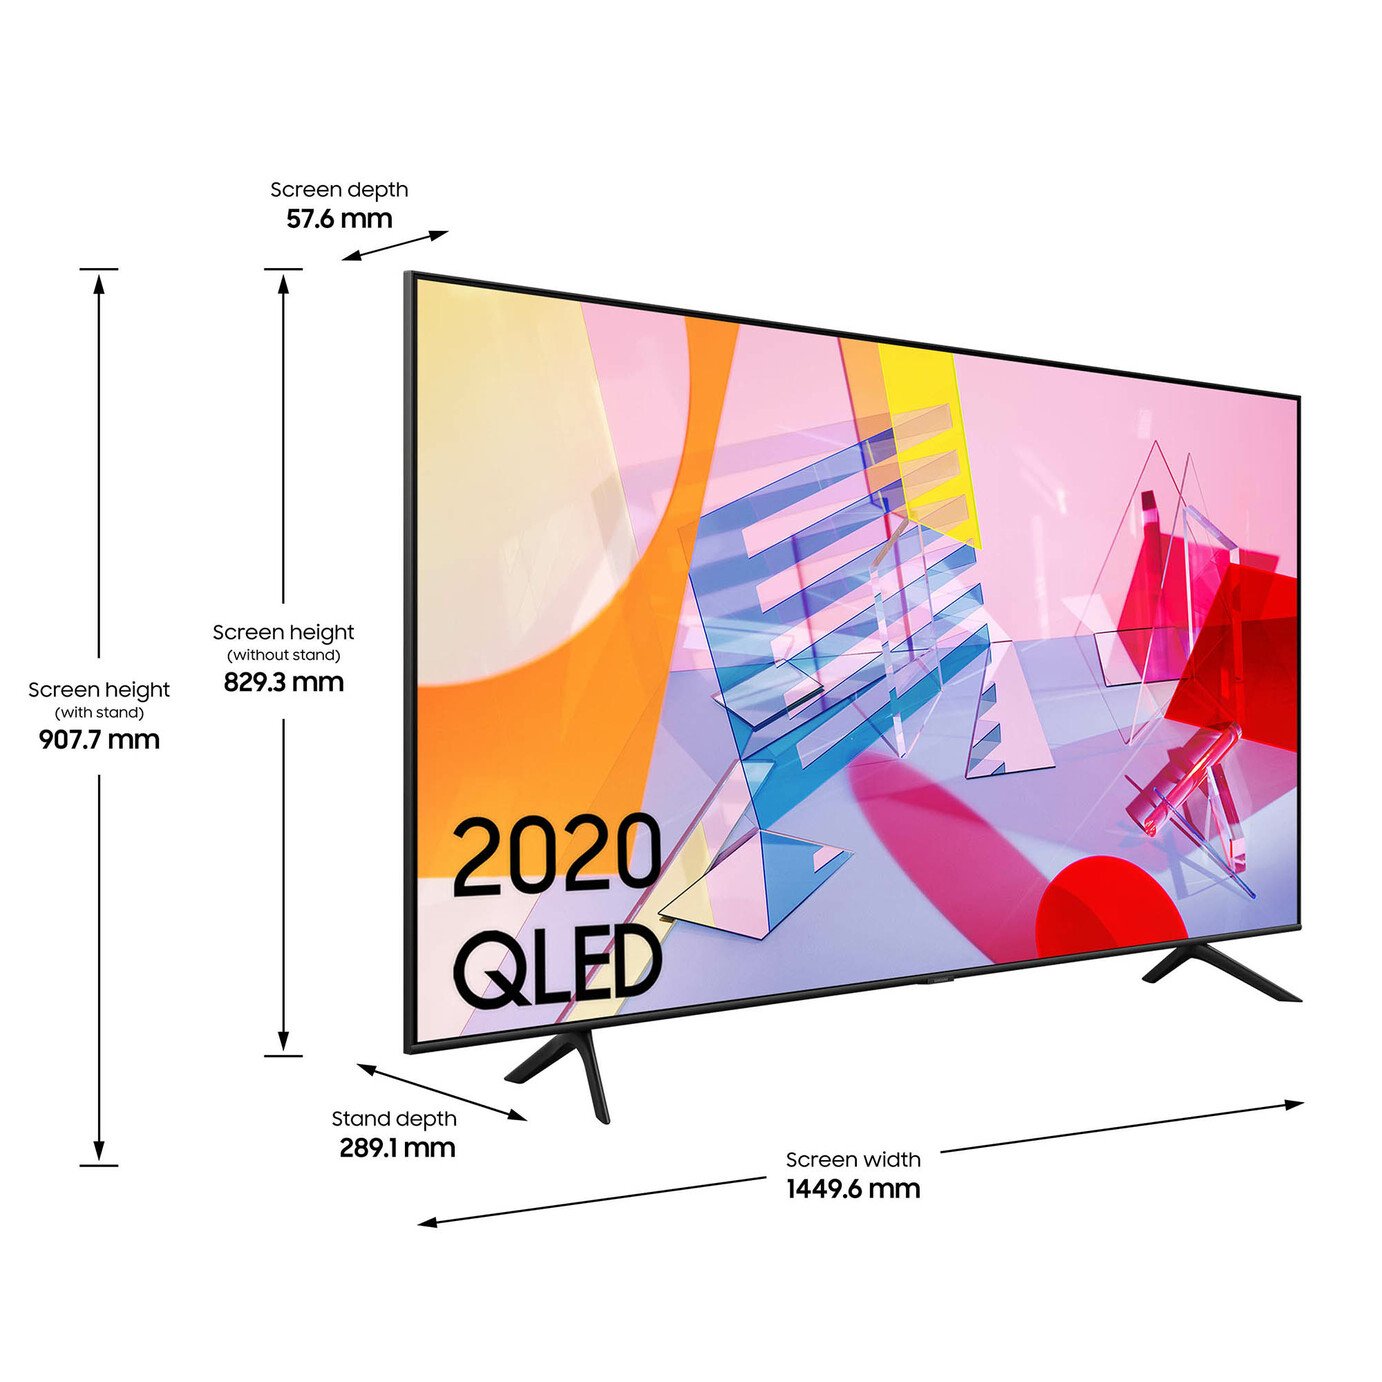 Samsung 65 Inch QE65Q60T Ultra HD QLED TV with HDR Review